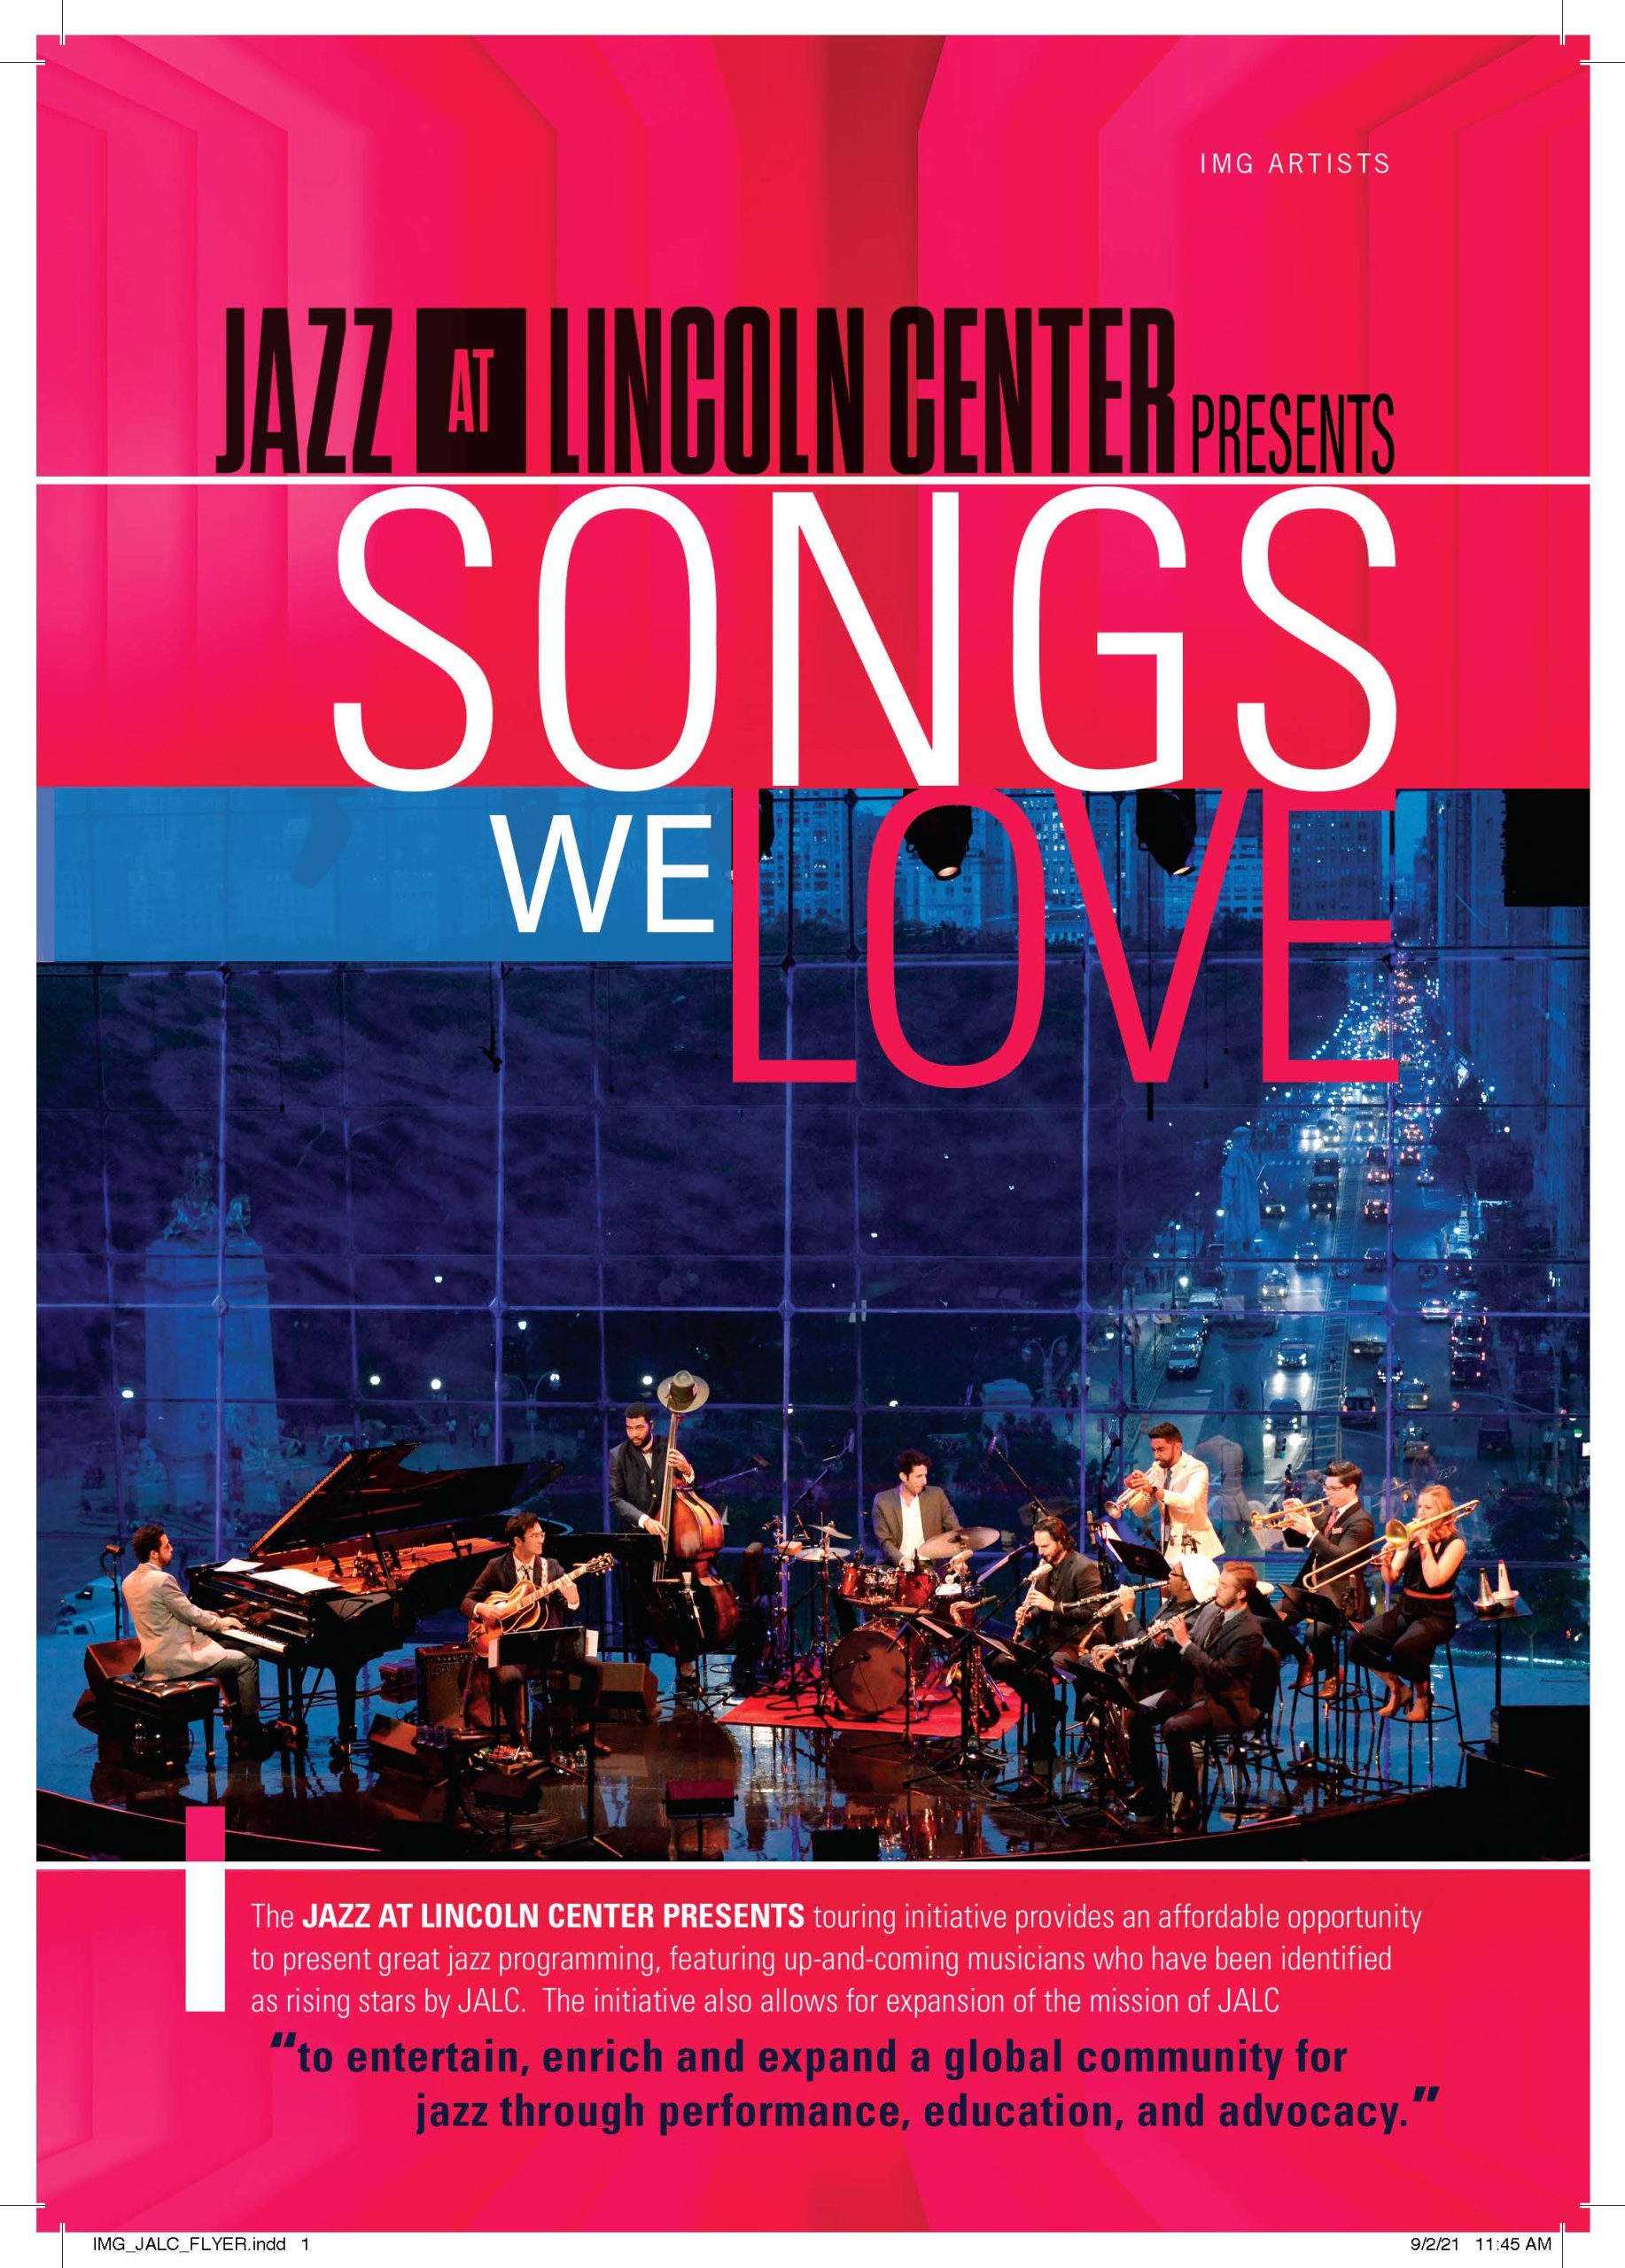 Jazz at Lincoln Center Songs We Love at Dade Cultural Arts CenterMiafl